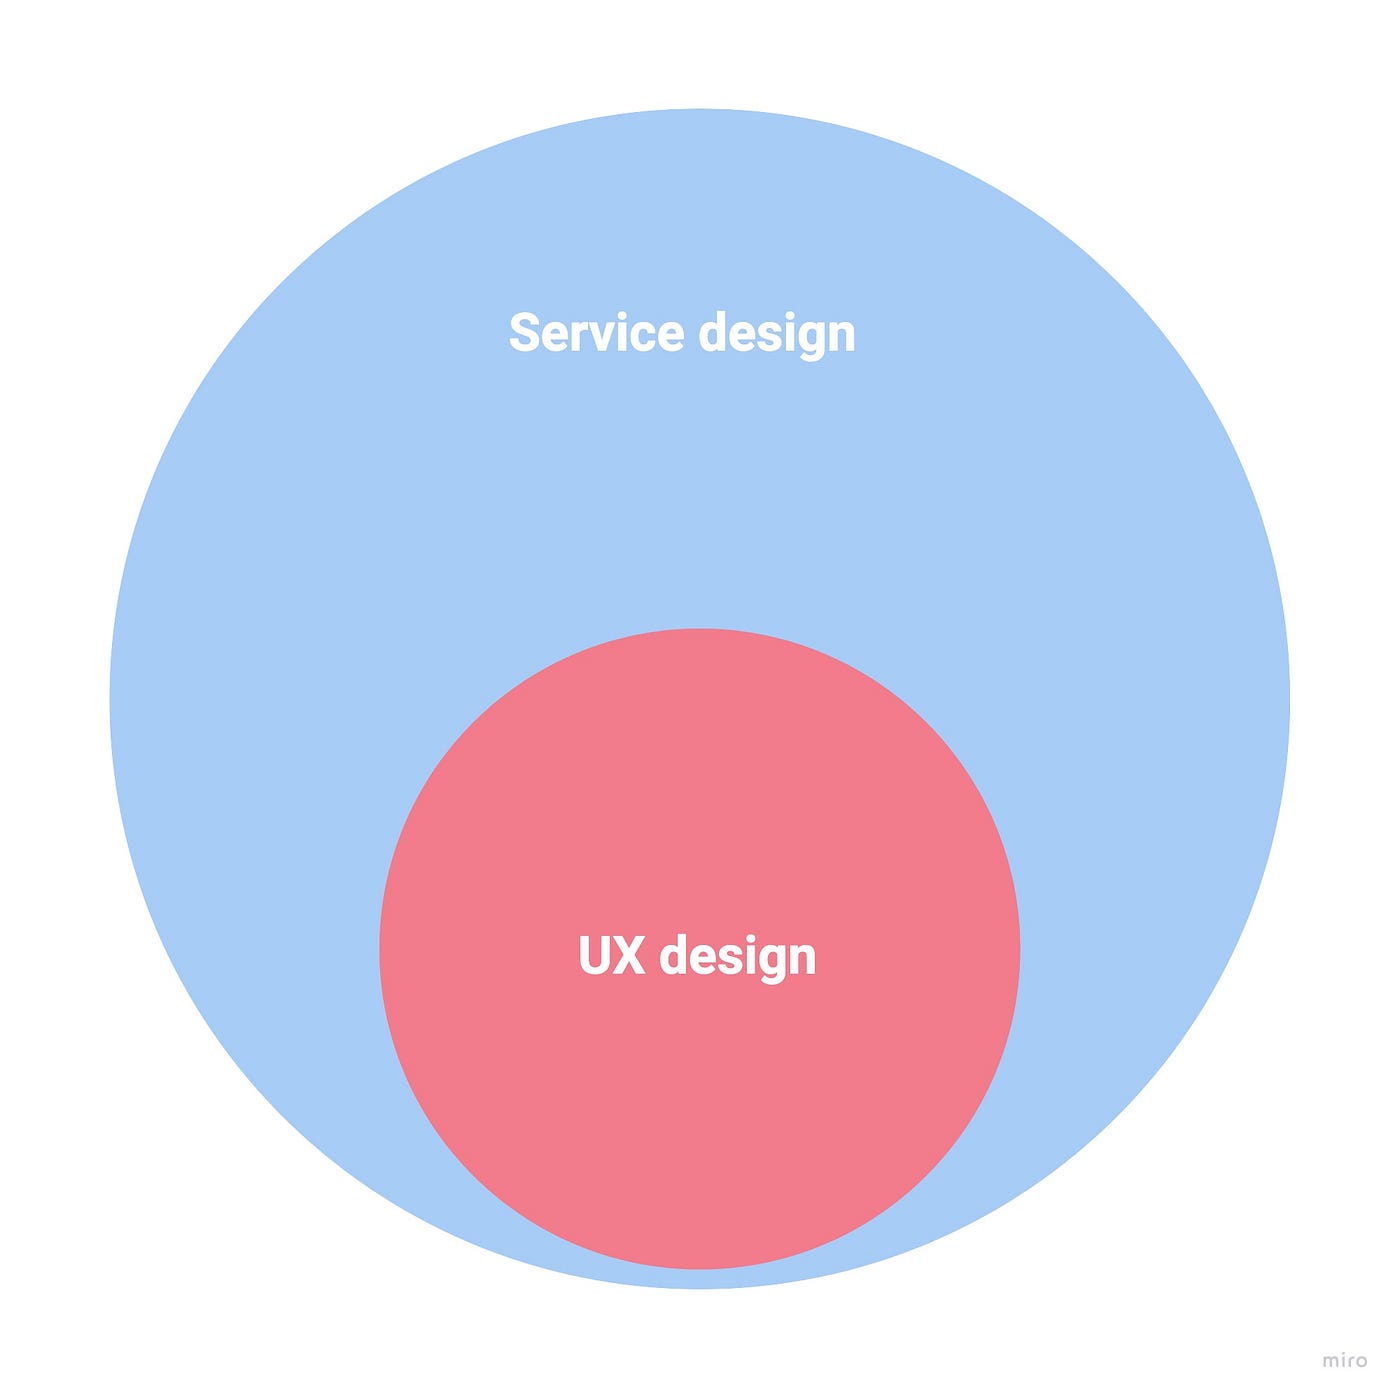 Illustration representing that UX Design is part of the Service Design.